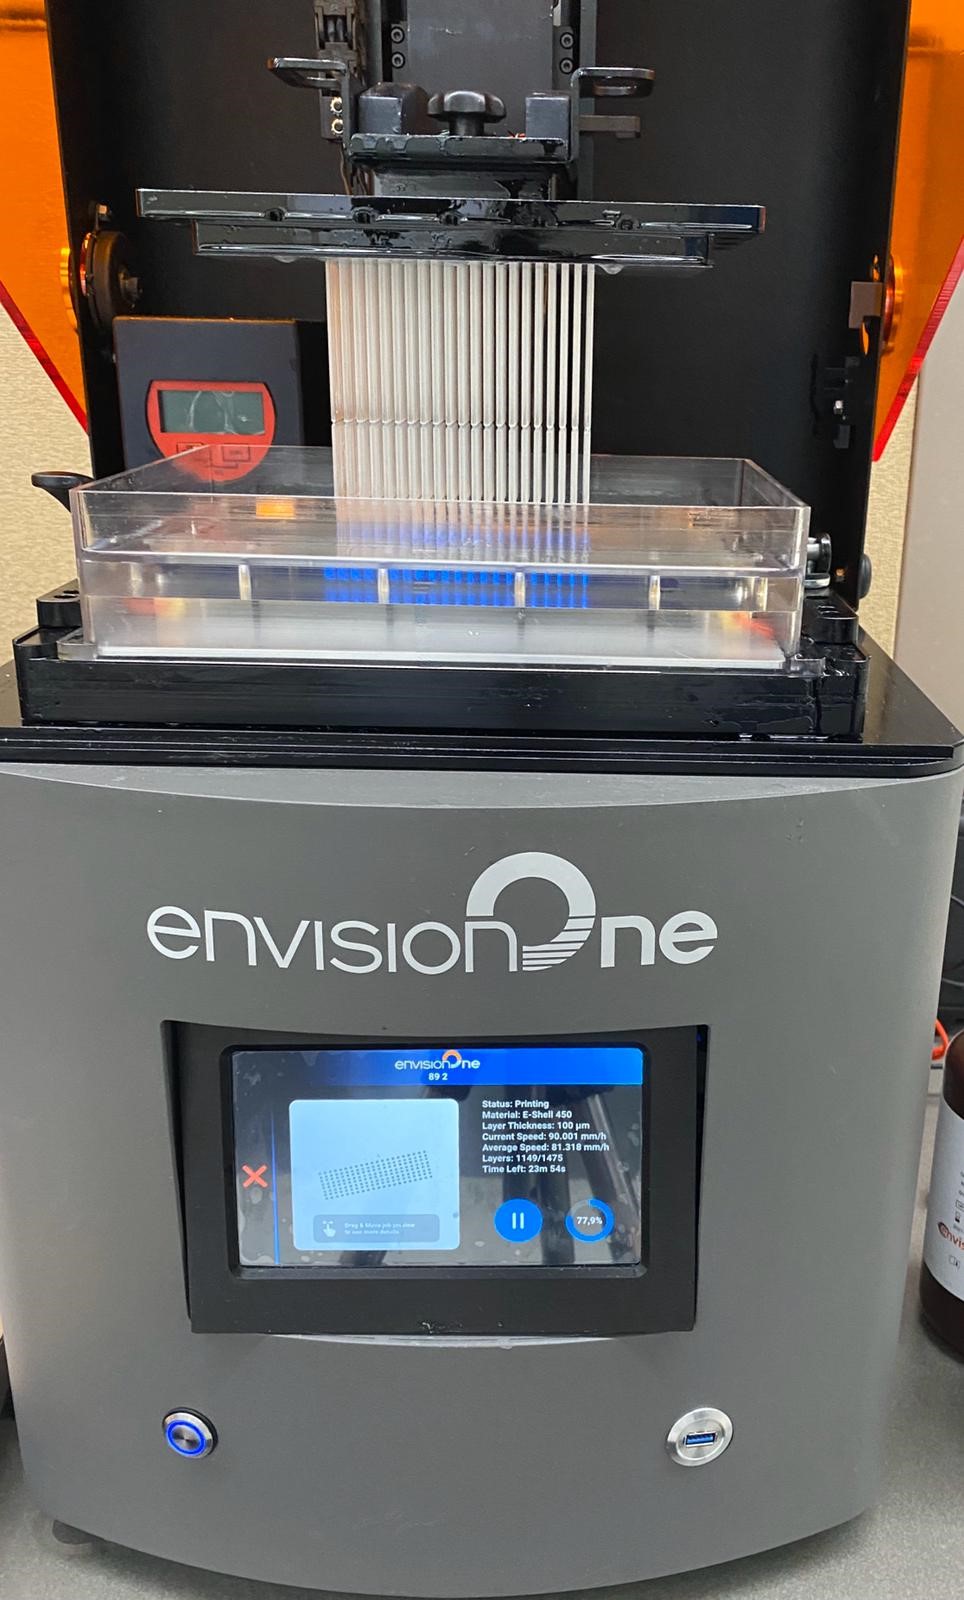 The Envision One cDLM from EnvisionTEC is capable of mass producing NP collection swabs for COVID-19 testing.